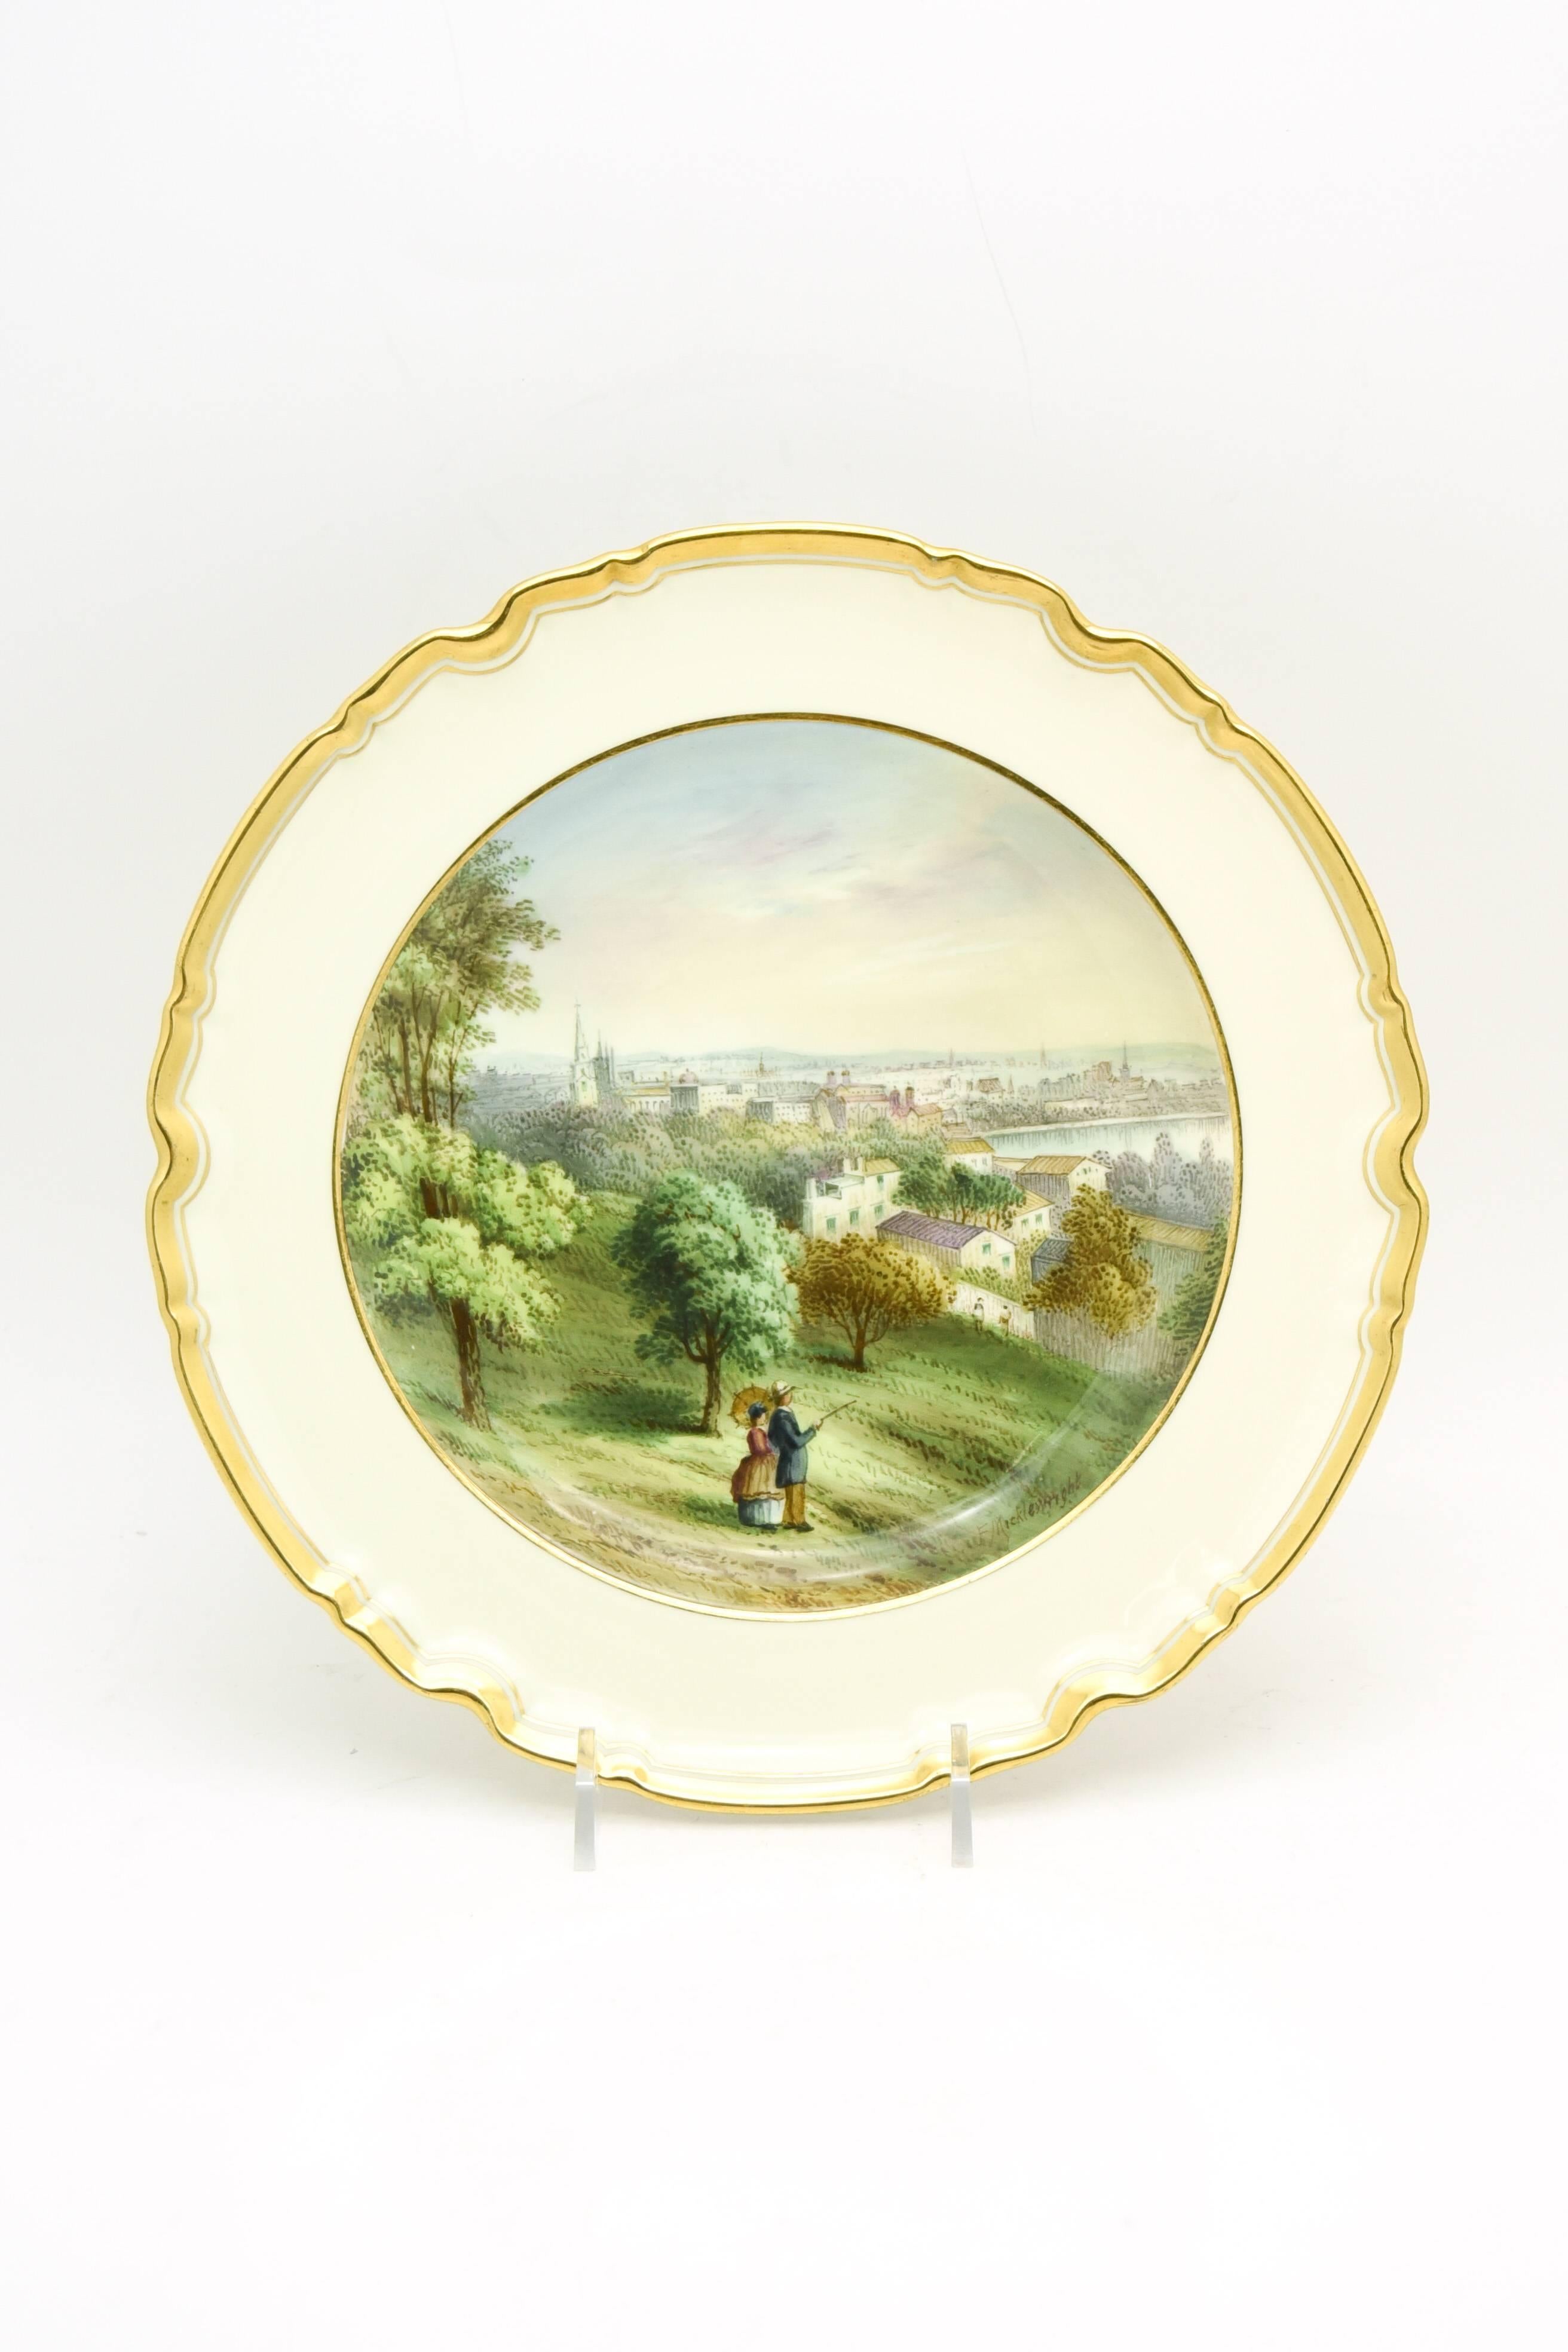 Gold 12 Copeland Spode Hand Painted Historic Fresh Water Cabinet/Dessert Plates For Sale